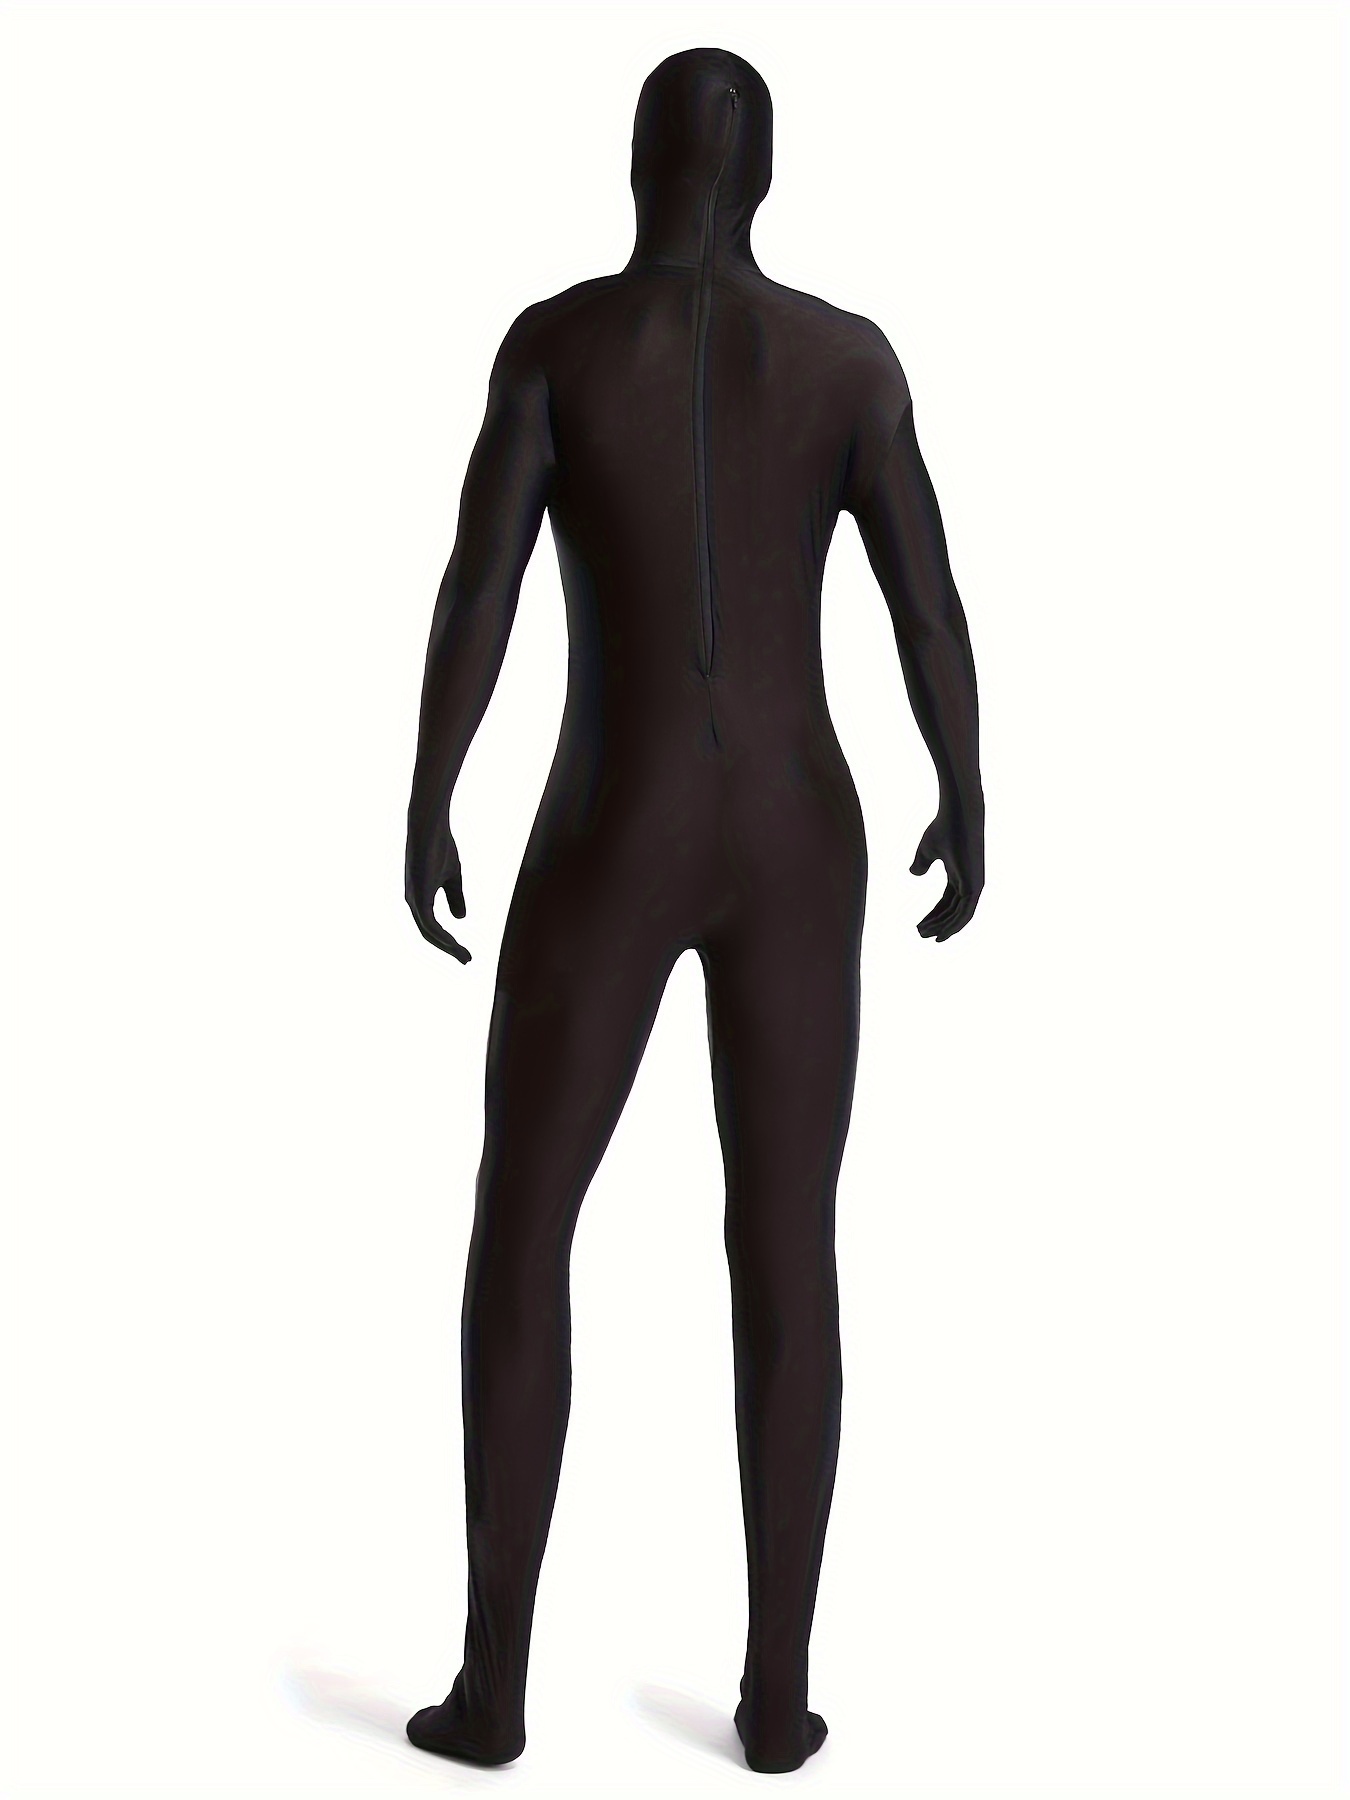 Unisex Spandex Stretch Adult Costume Zentai Disappearing Man Body Suit